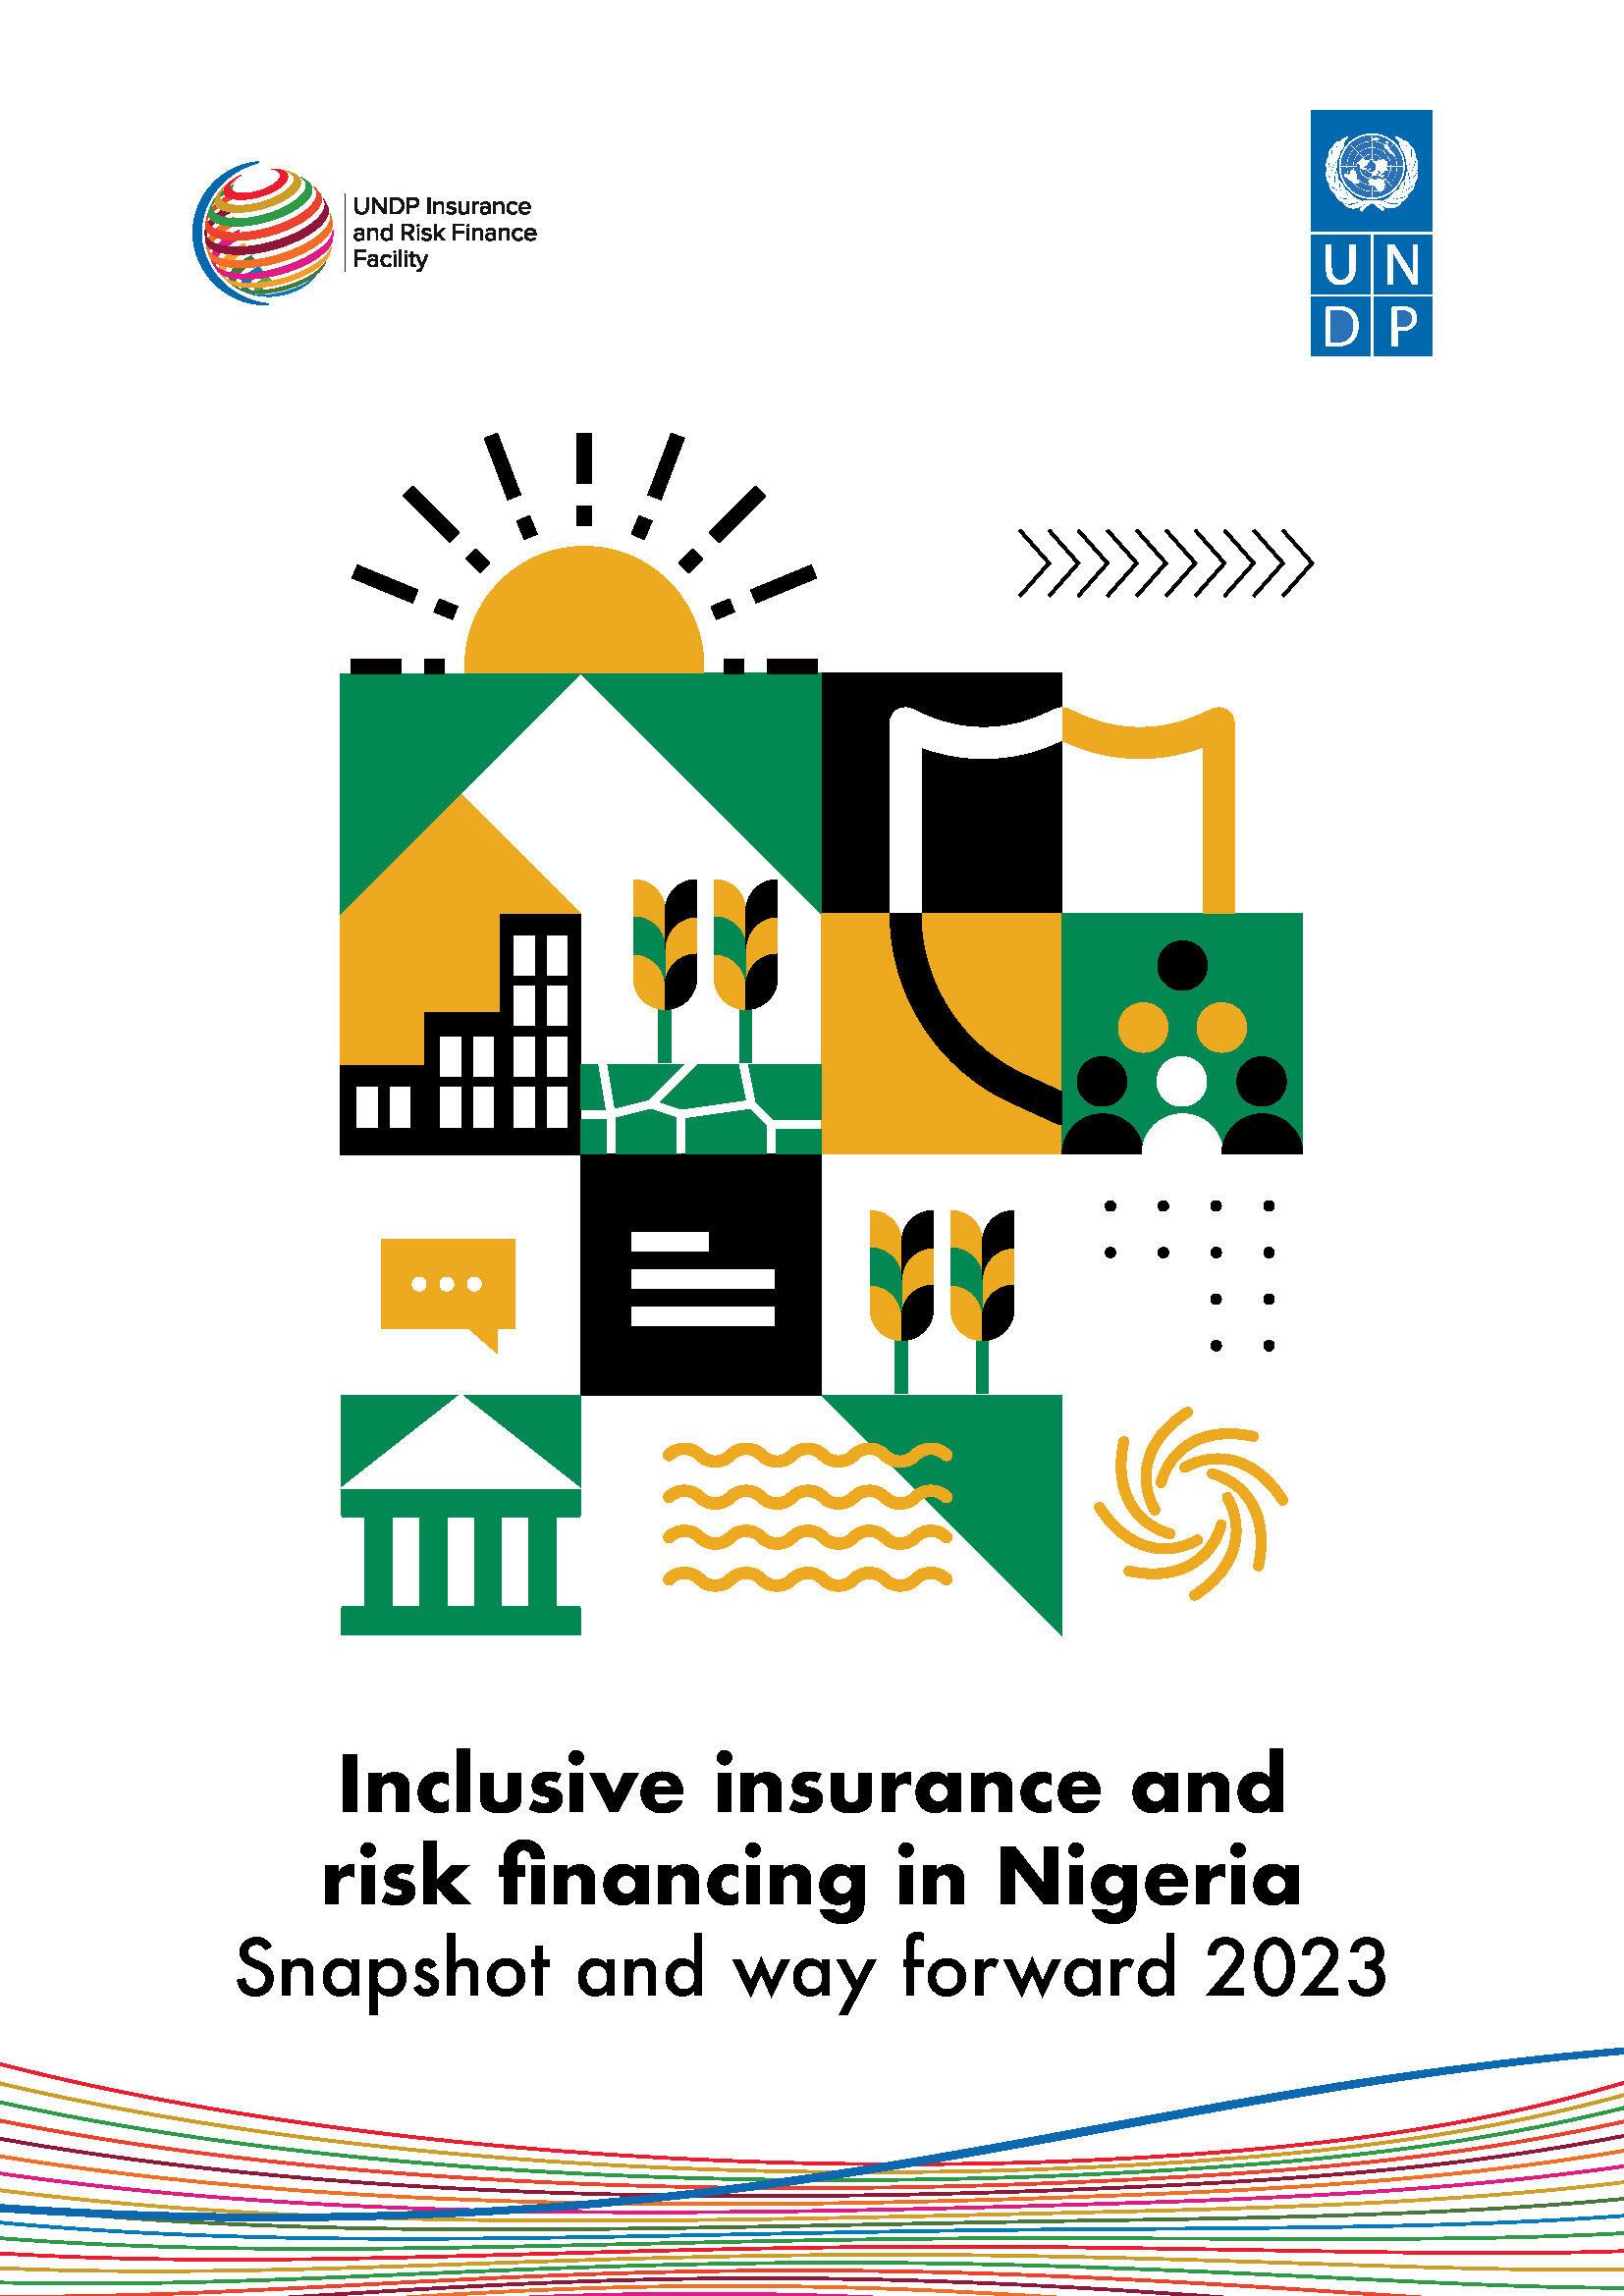 Inclusive insurance and risk financing in Nigeria. Snapshot and way forward 2023